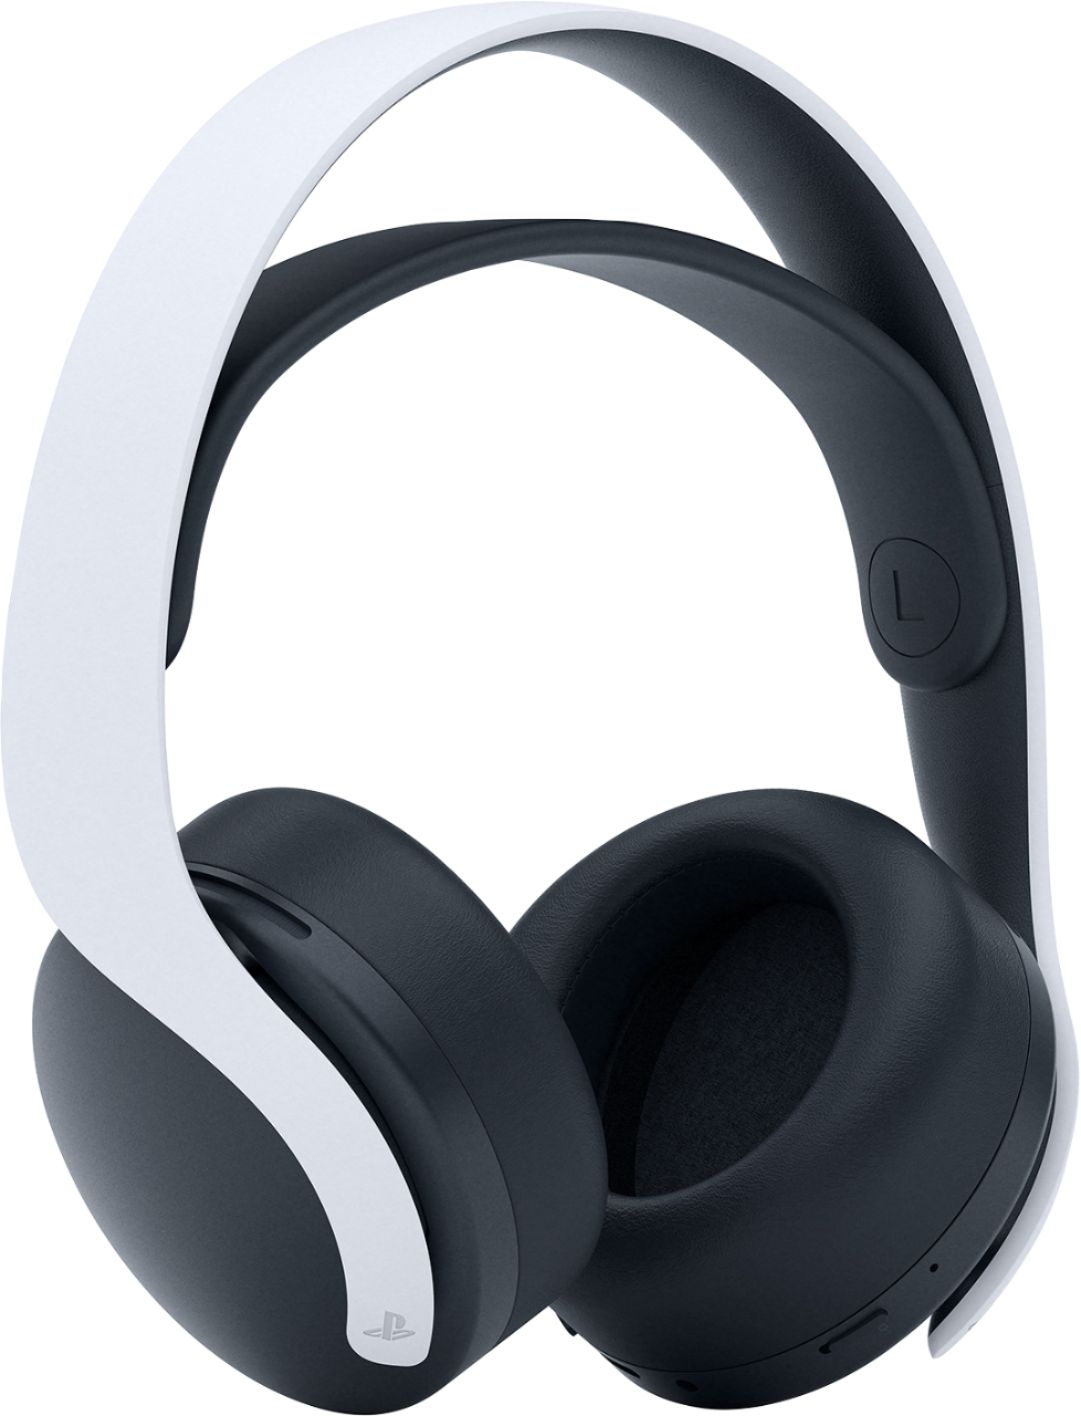 Bemyndige rapport Tempel Sony PULSE 3D Wireless Headset for PS5, PS4, and PC White 3005688 - Best Buy